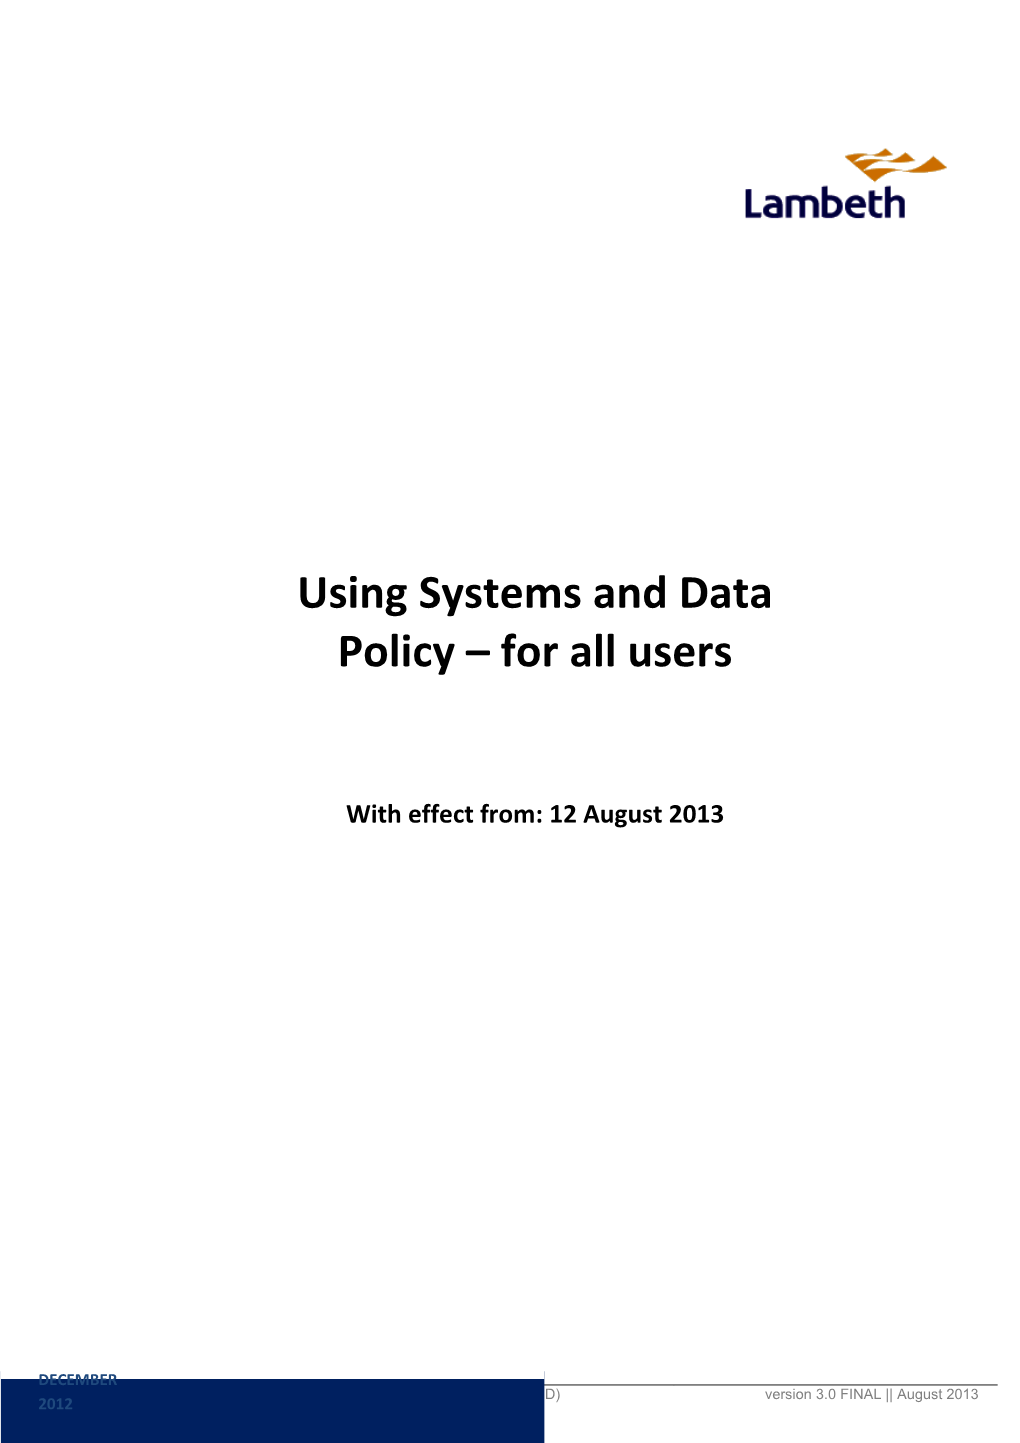 Using Systems and Data Policy for All Users